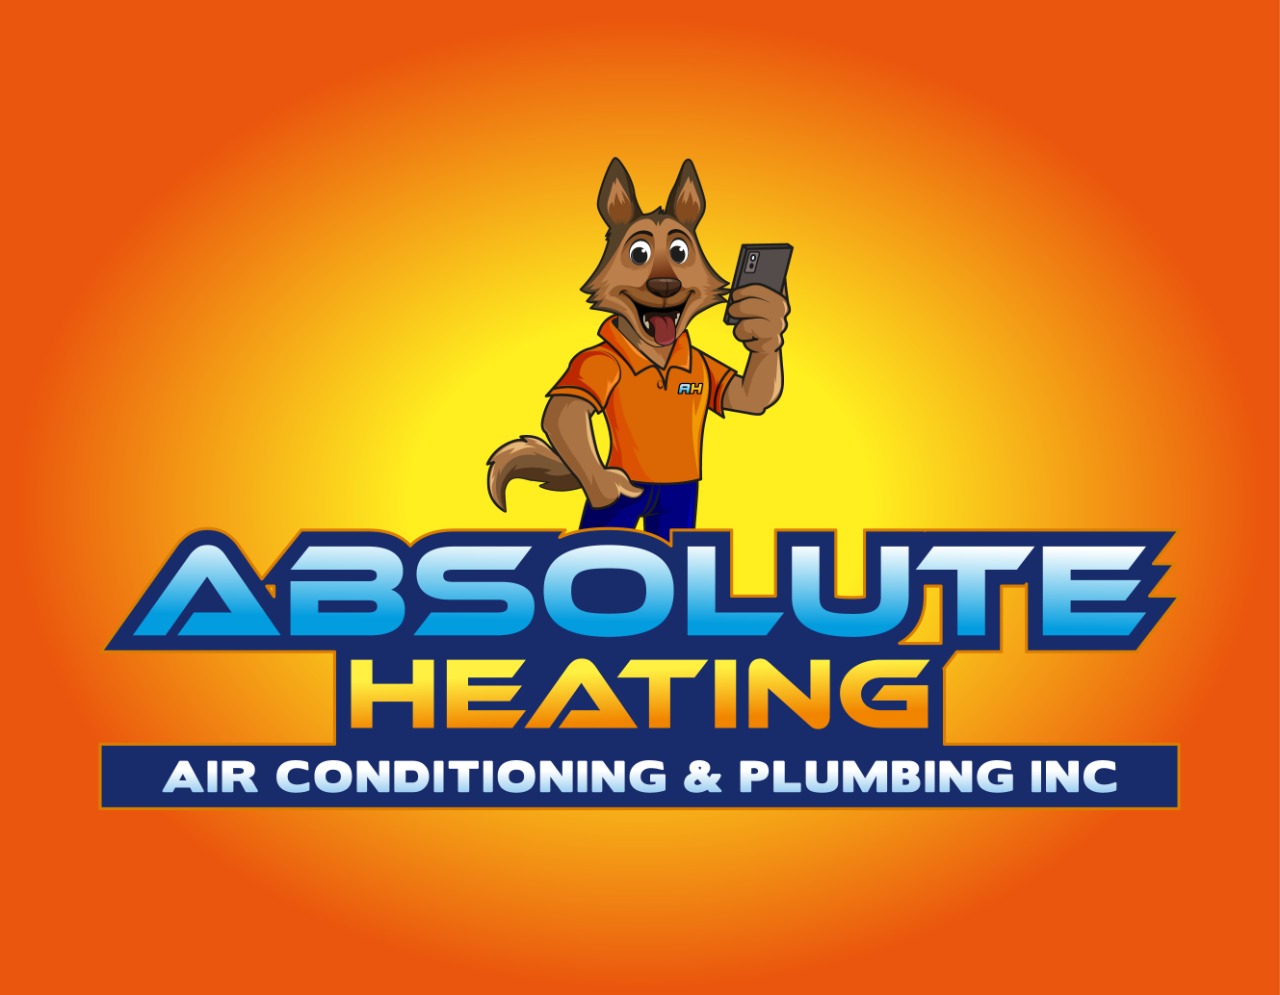 Absolute Heating, Air Conditioning & Plumbing Inc logo